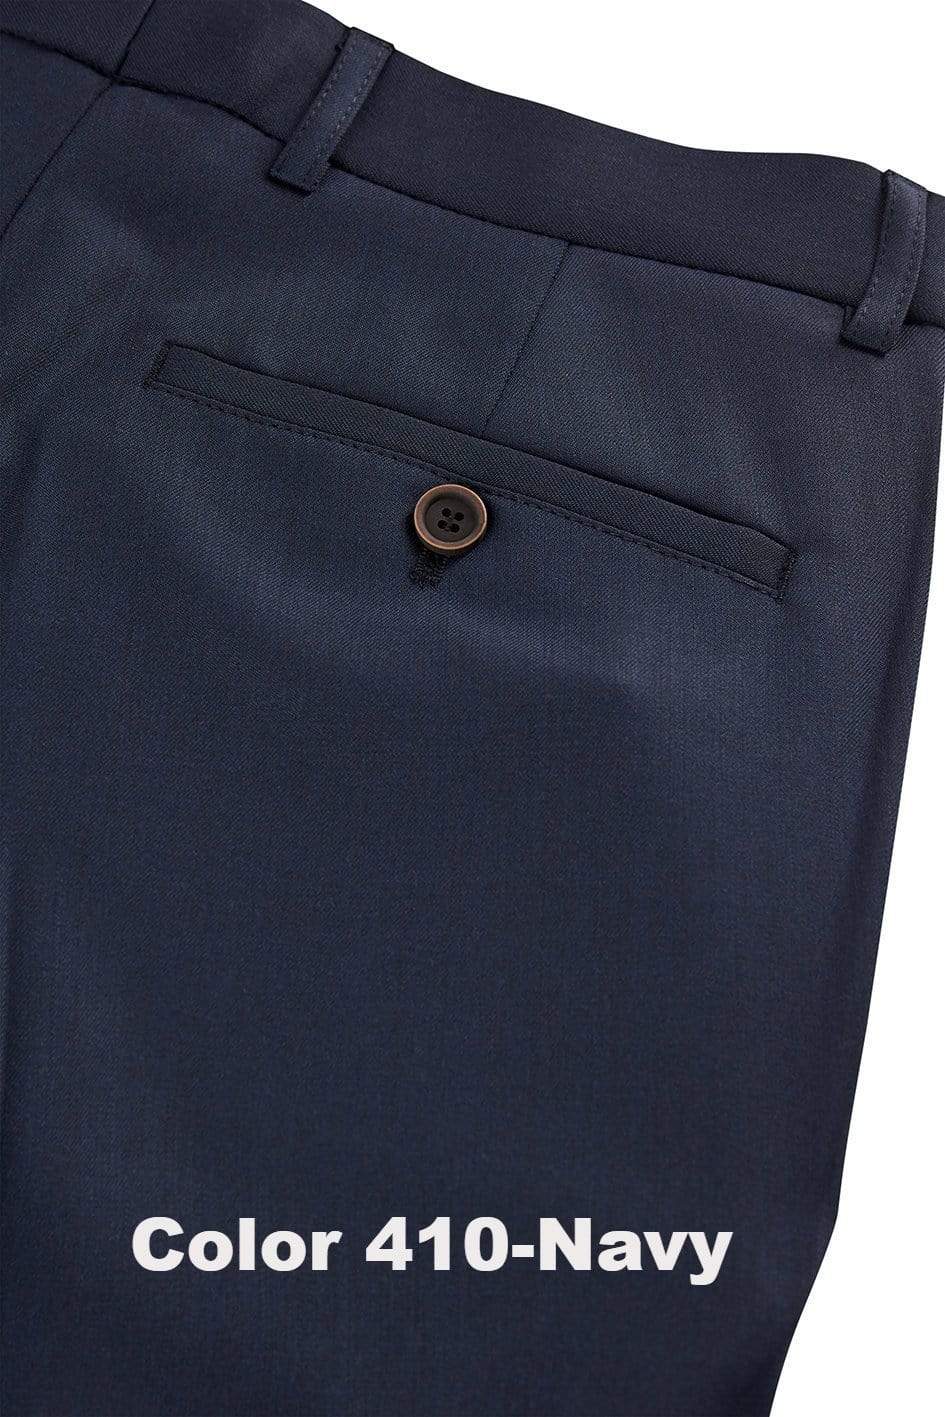 Sunwill Classic Traveller Trousers Available in 4 Colors and Size 34-44